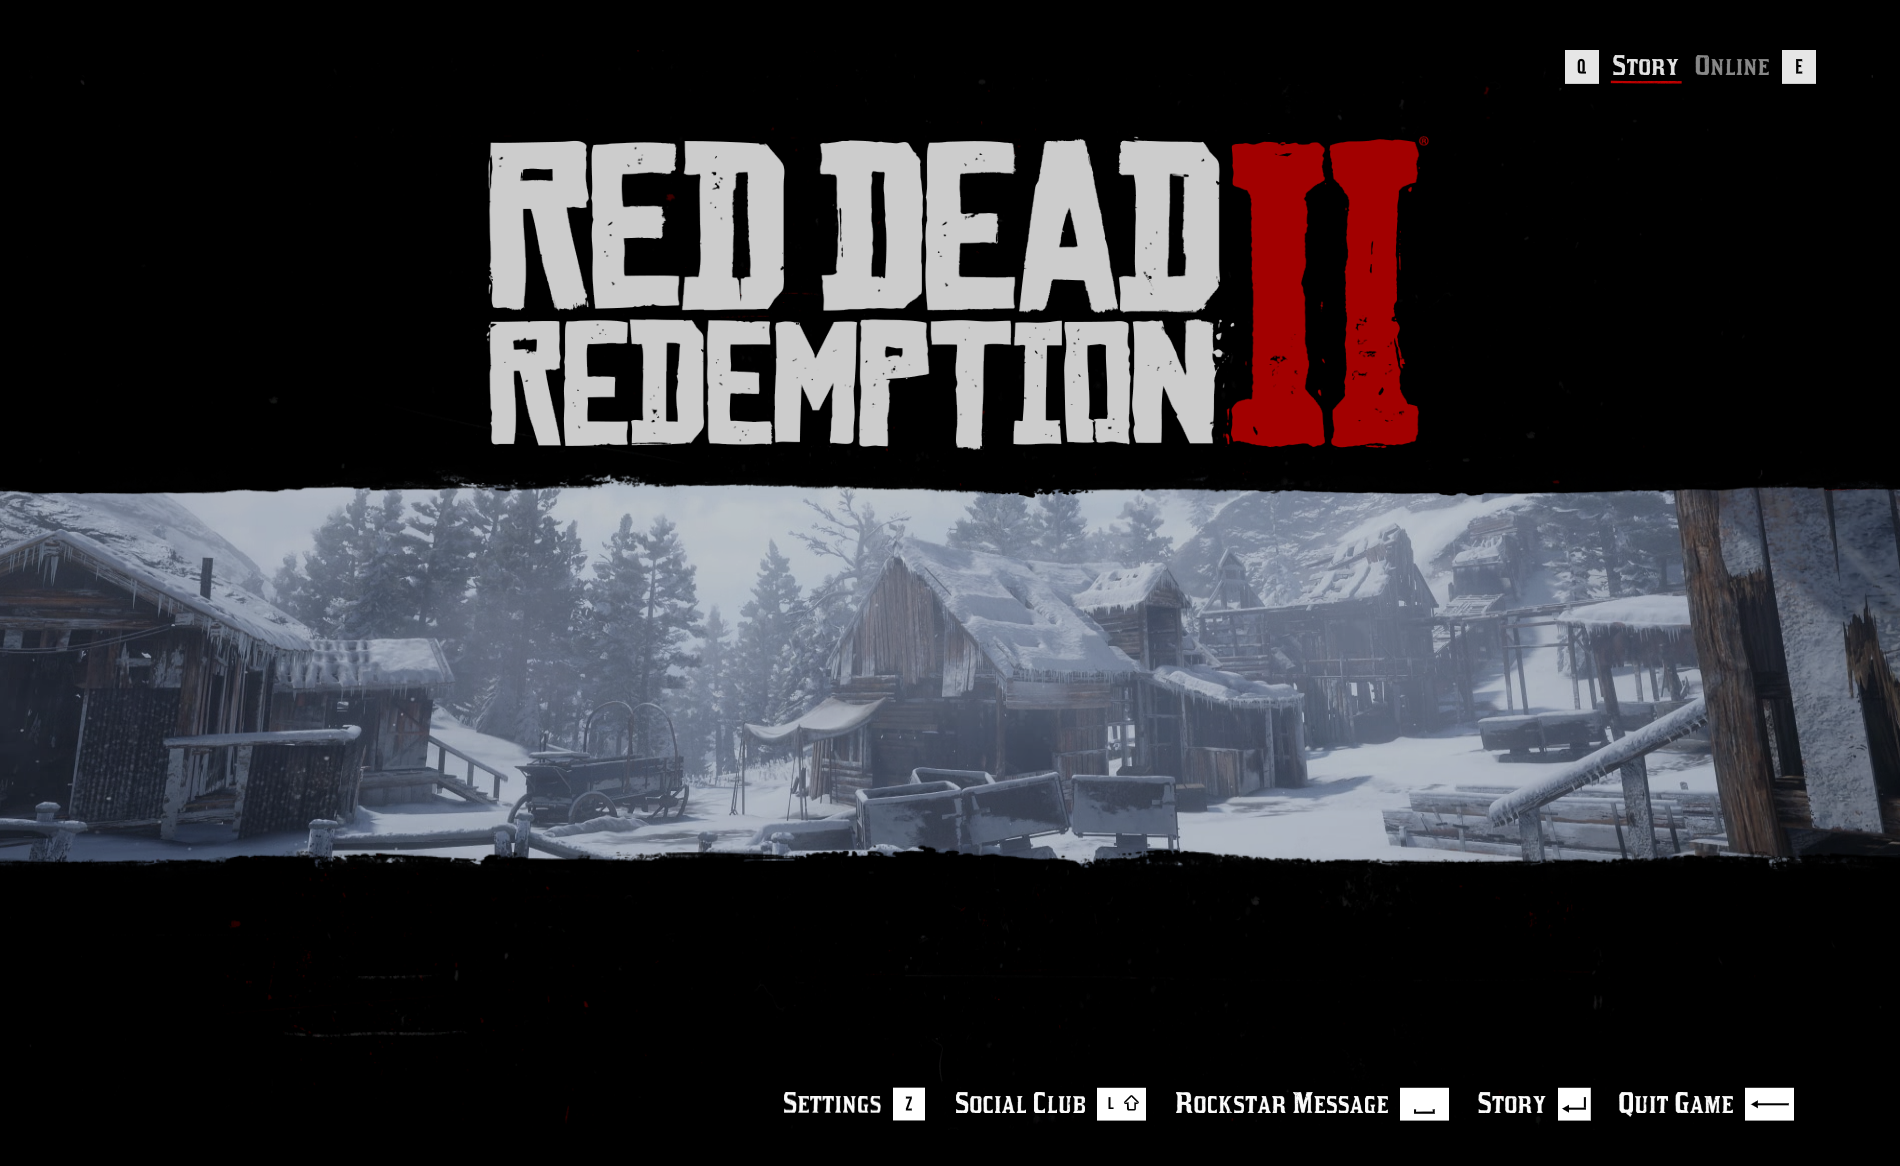 Screenshot of the Red Dead Redemption 2 live casino cyprus www.indaxis.com screen.